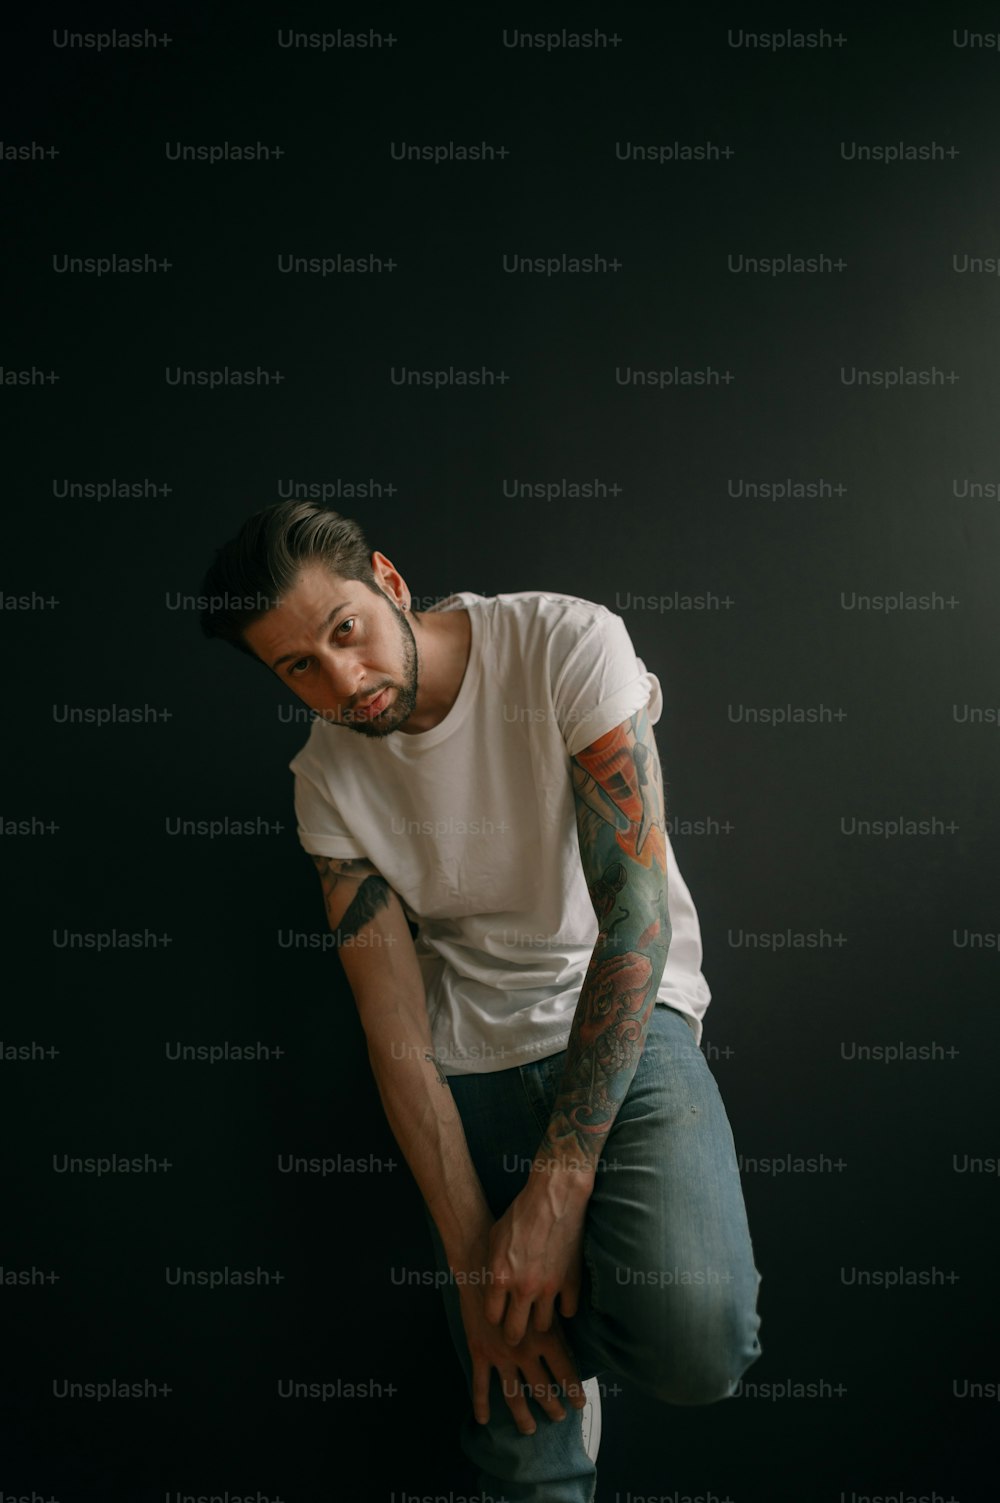 a man with tattoos posing for the camera